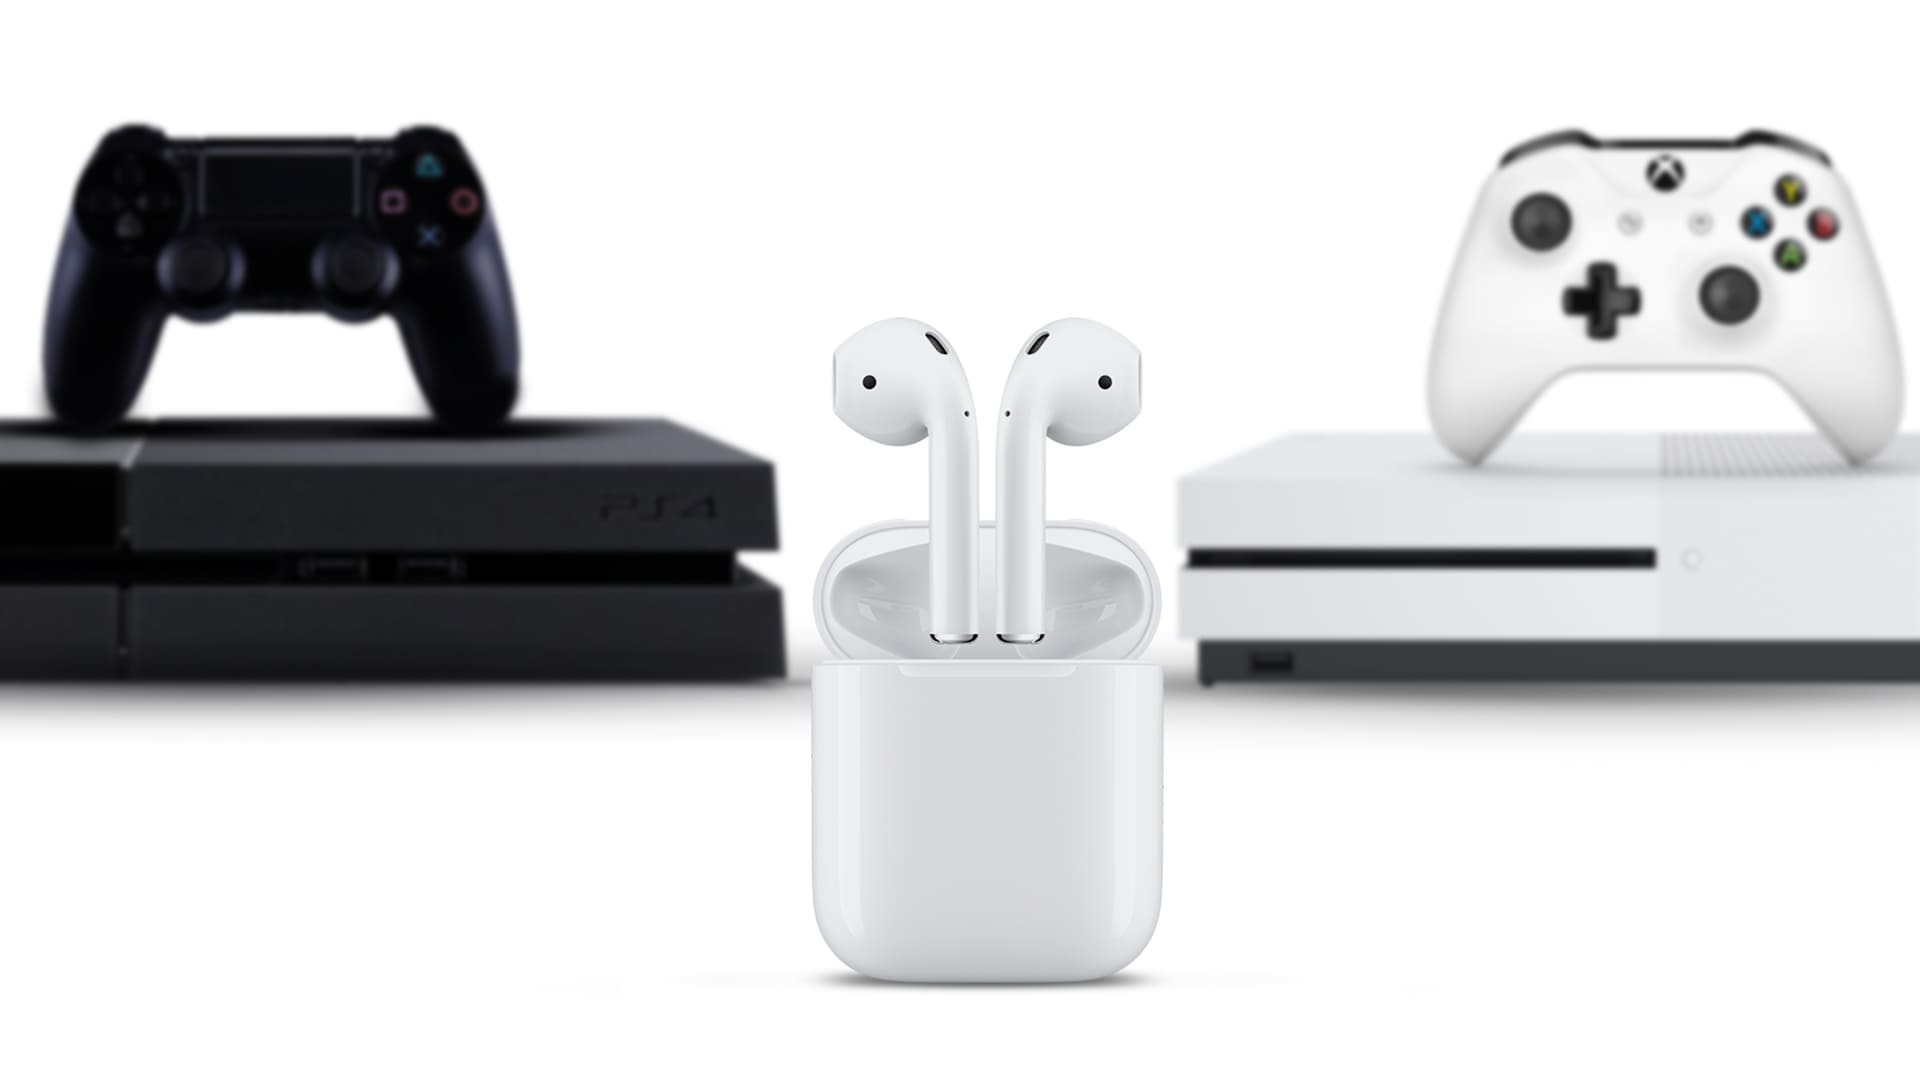 How to connect AirPods to PS4